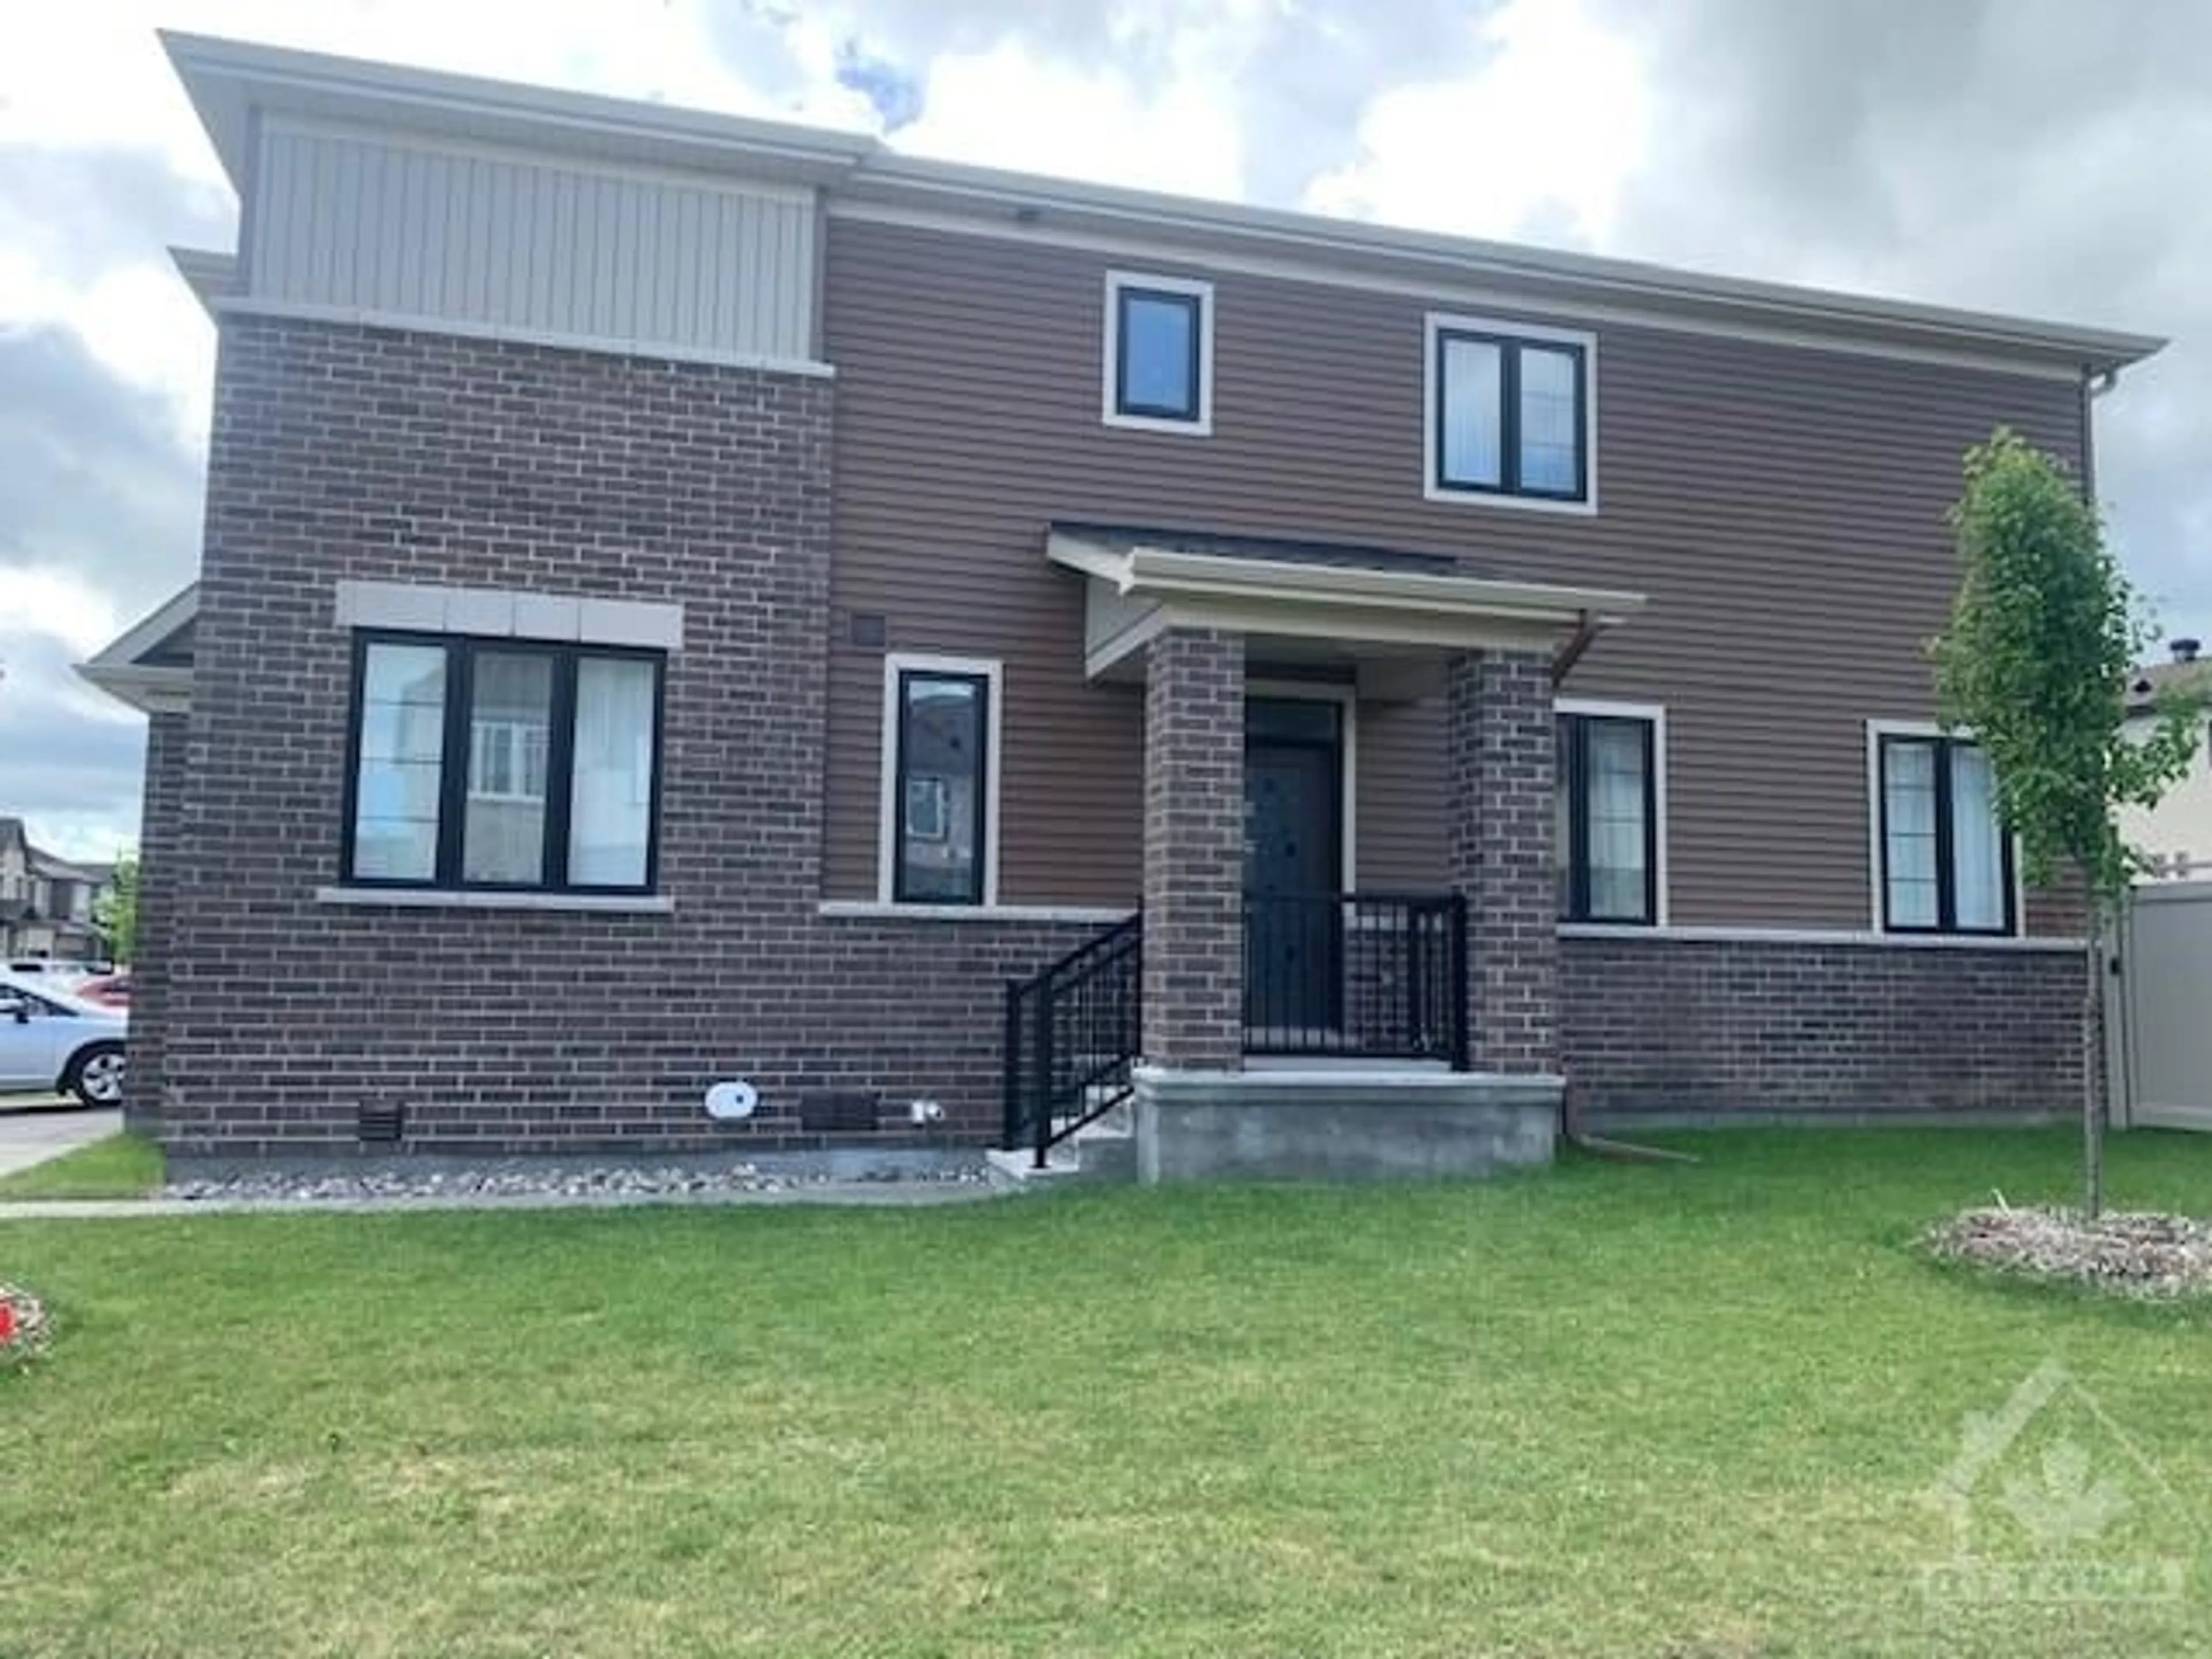 Home with brick exterior material for 1041 BALLYHALE Hts, Ottawa Ontario K2J 6Y1